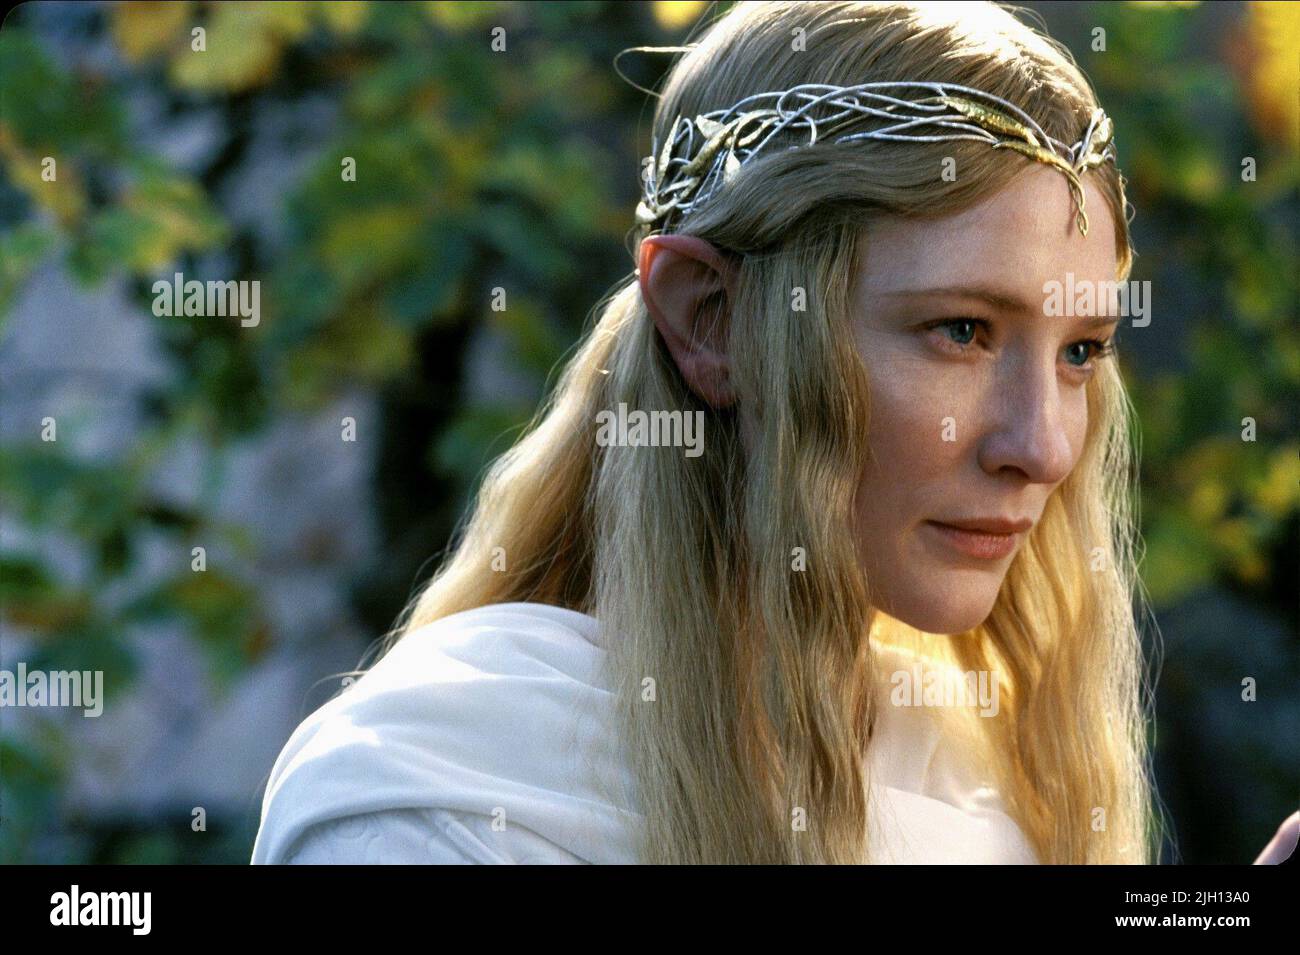 CATE BLANCHETT, THE LORD OF THE RINGS: THE FELLOWSHIP OF THE RING, 2001 Stock Photo